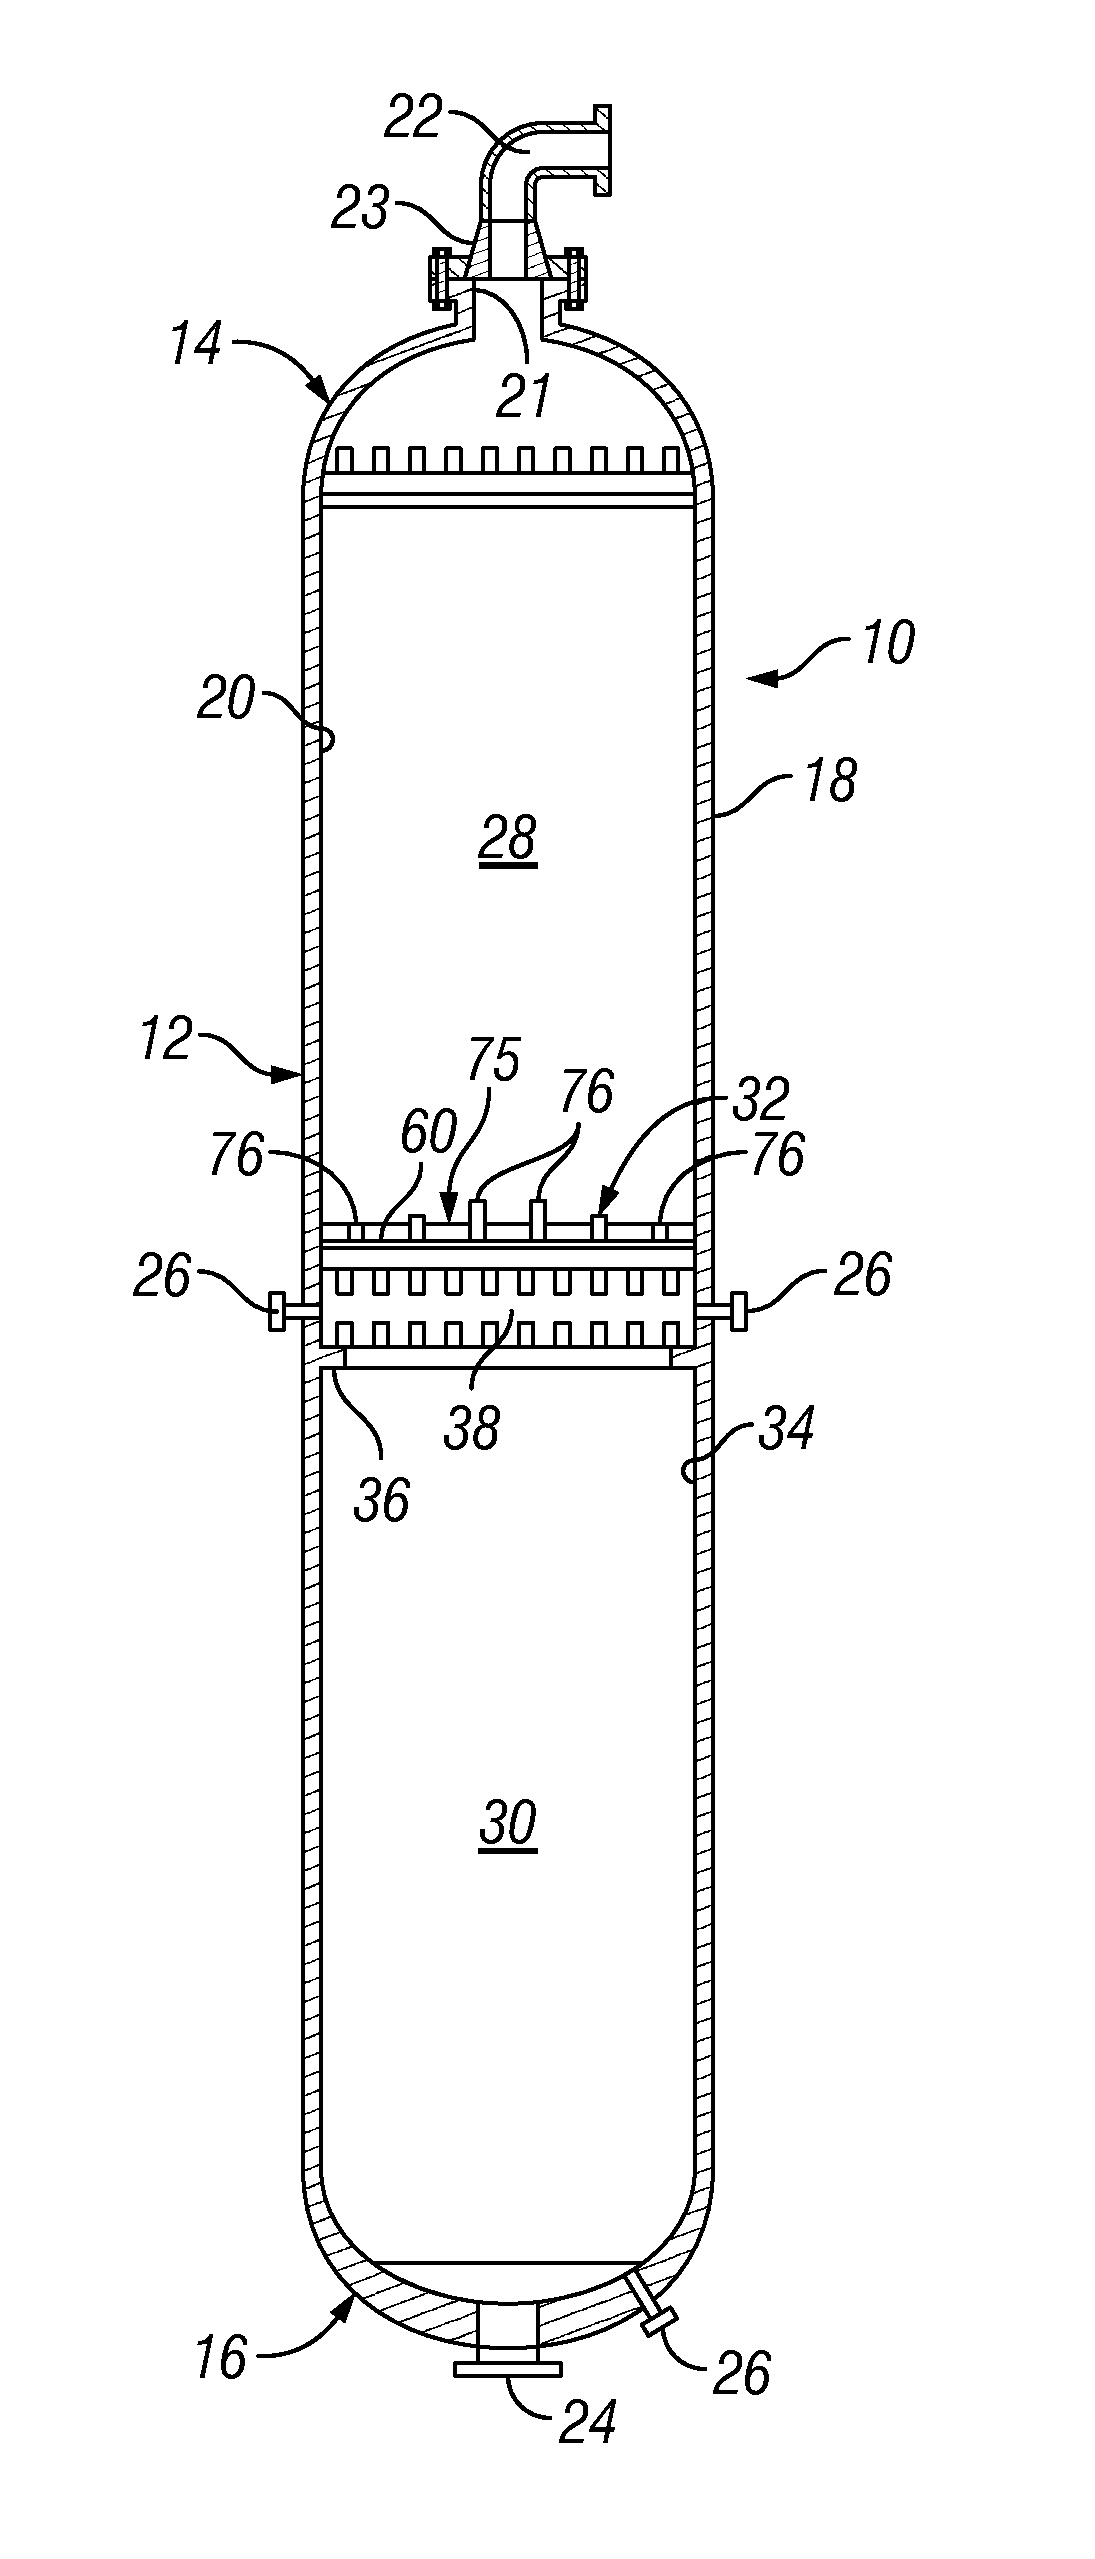 Tray support insers for chemical reactor vessels and methods of use